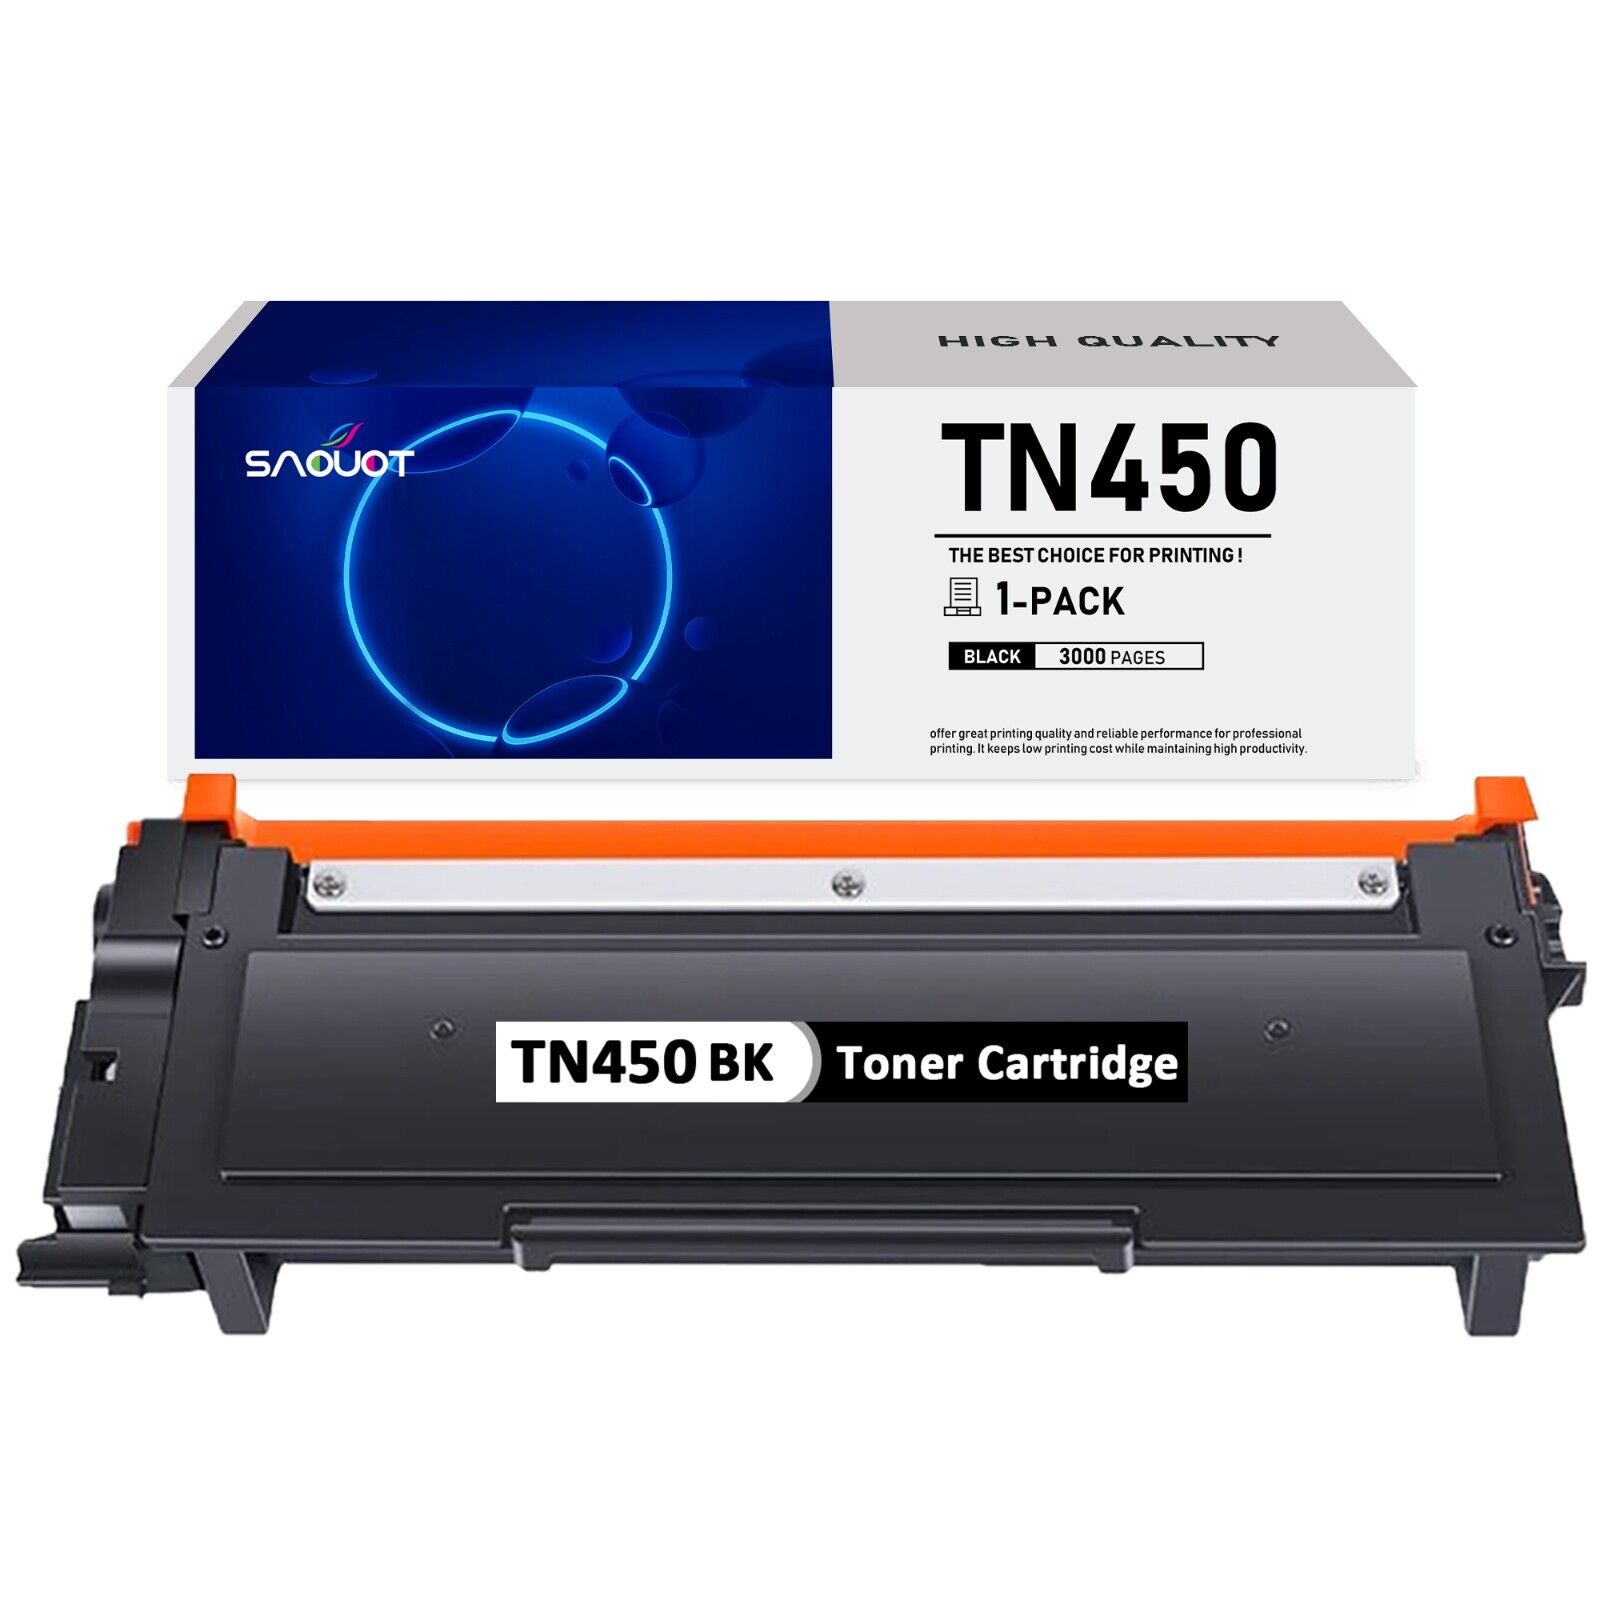 TN450 Toner Cartridge Replacement for Brother L-2270DW 2280DW 2250DN MFC-7240